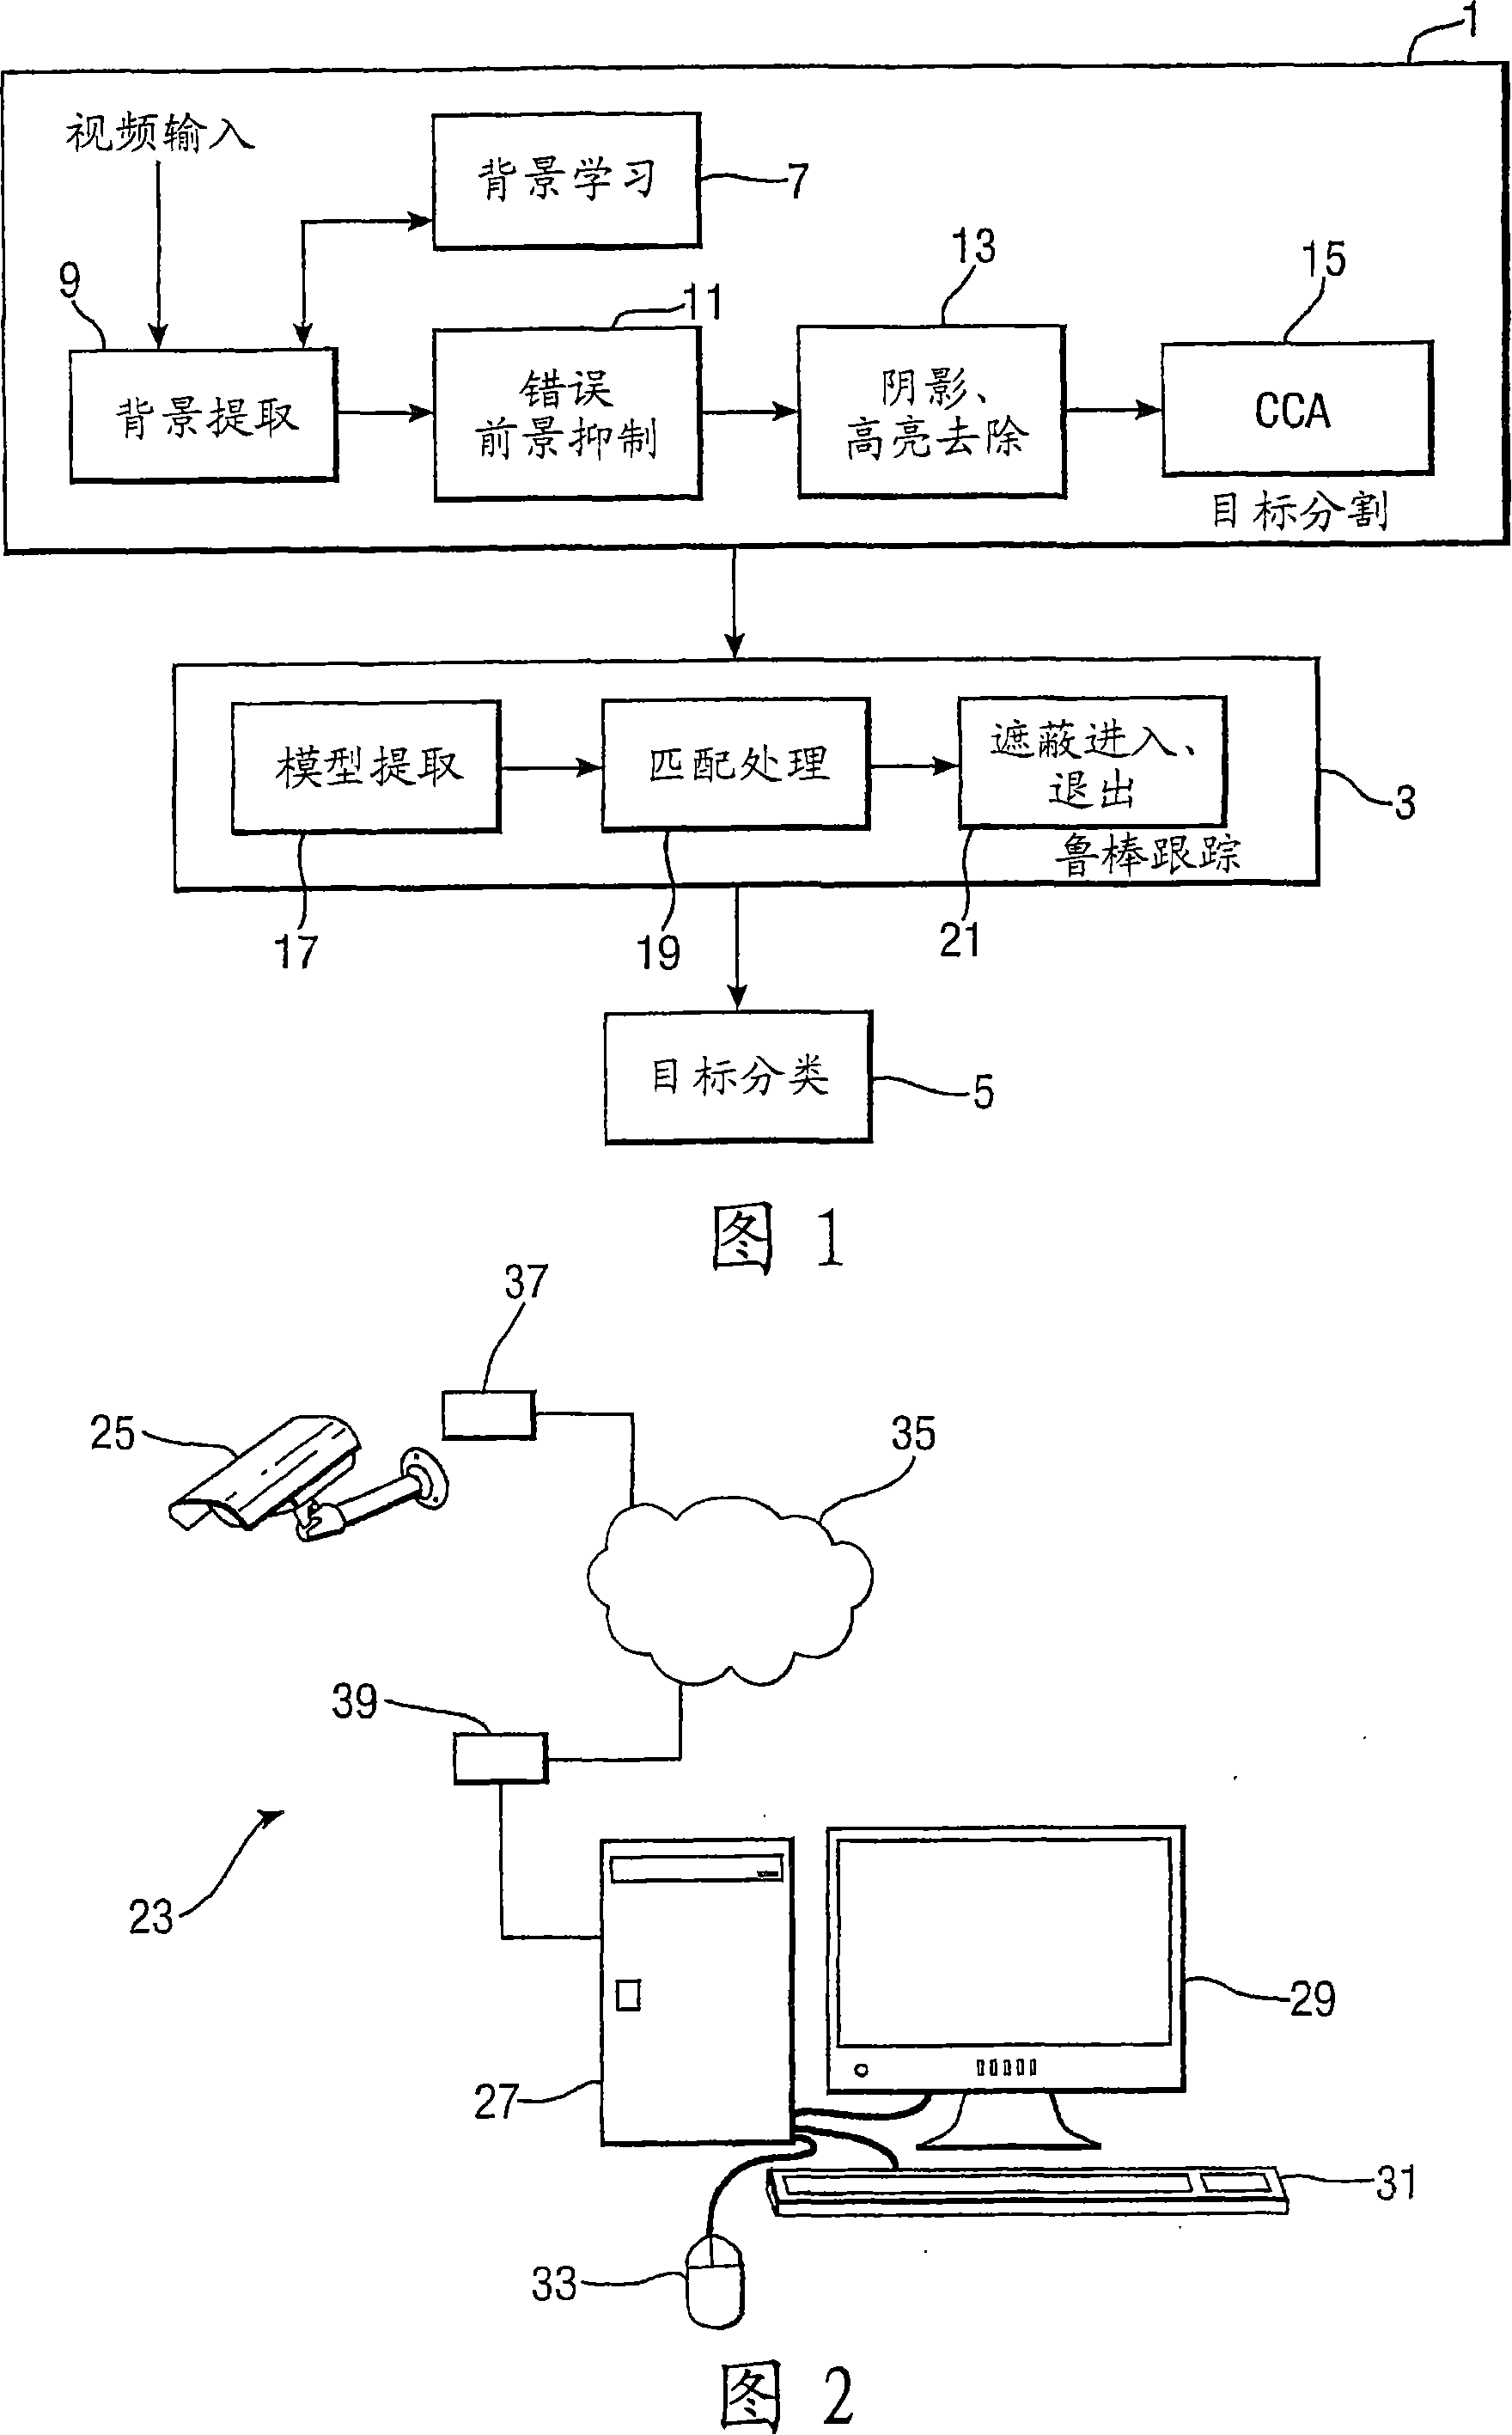 Method of tracking objects in a video sequence